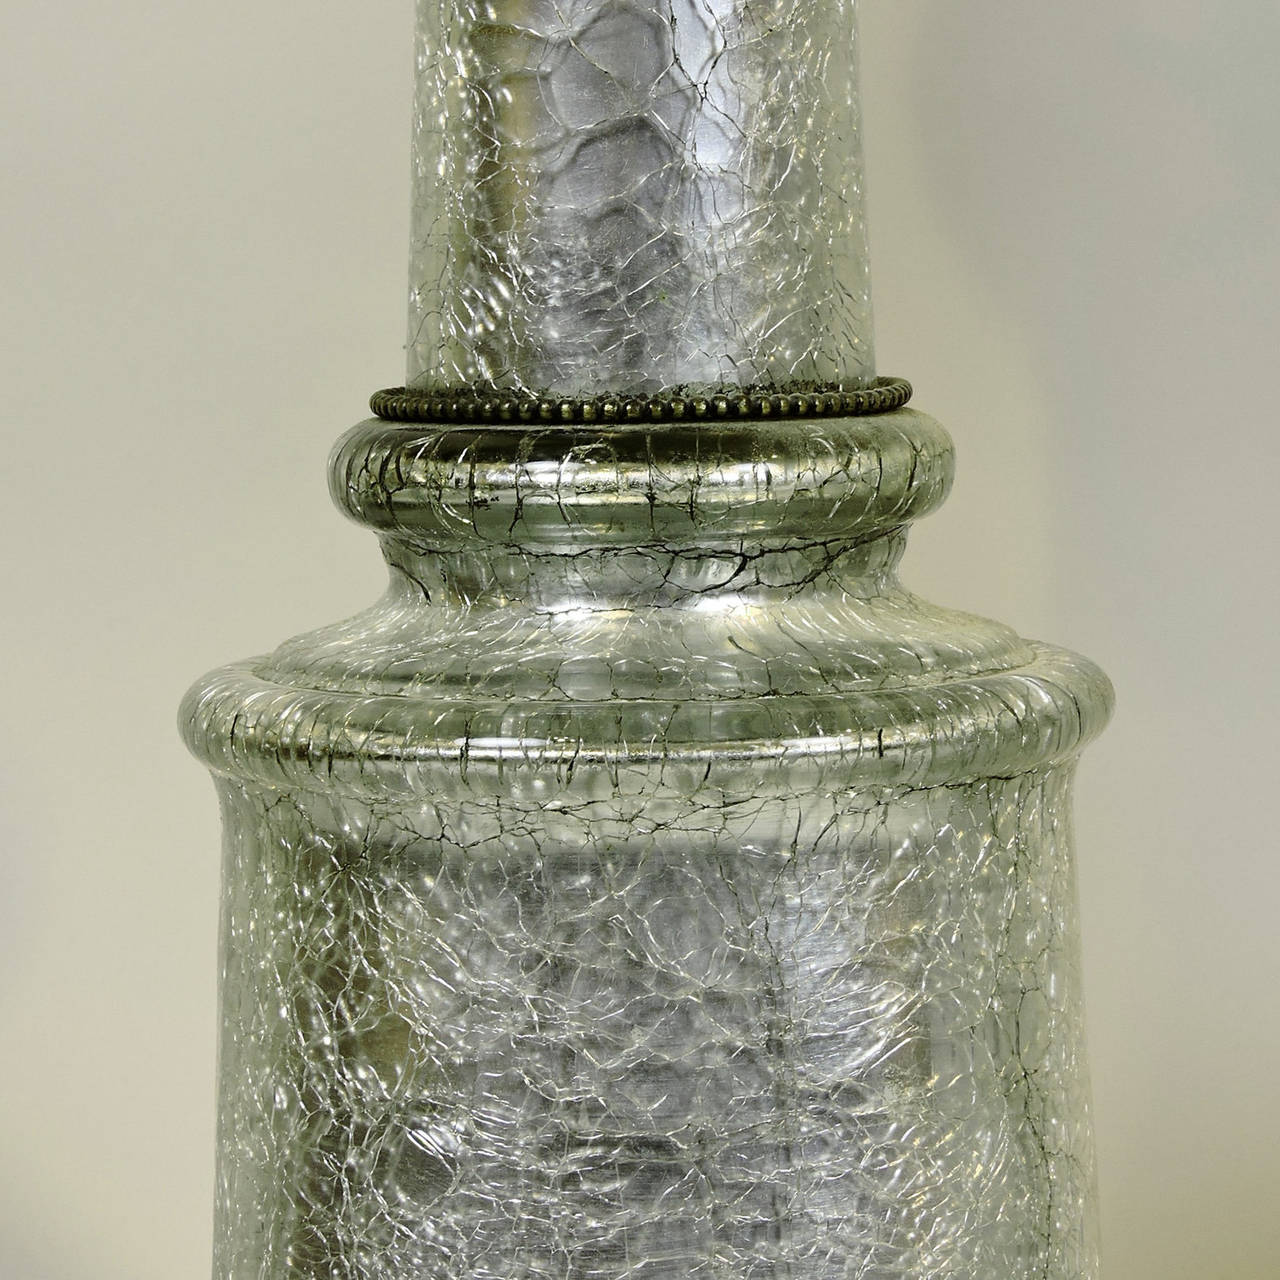 Pair of dramatic silver crackle glass column-form table lamps, with beaded bronze accents and base, 20th century. Similar to gold examples made by Paul Hansen in the 1950s for Hollywood Regency.
Measure: Glass 23 inches, diameter 7 1/2 inches.